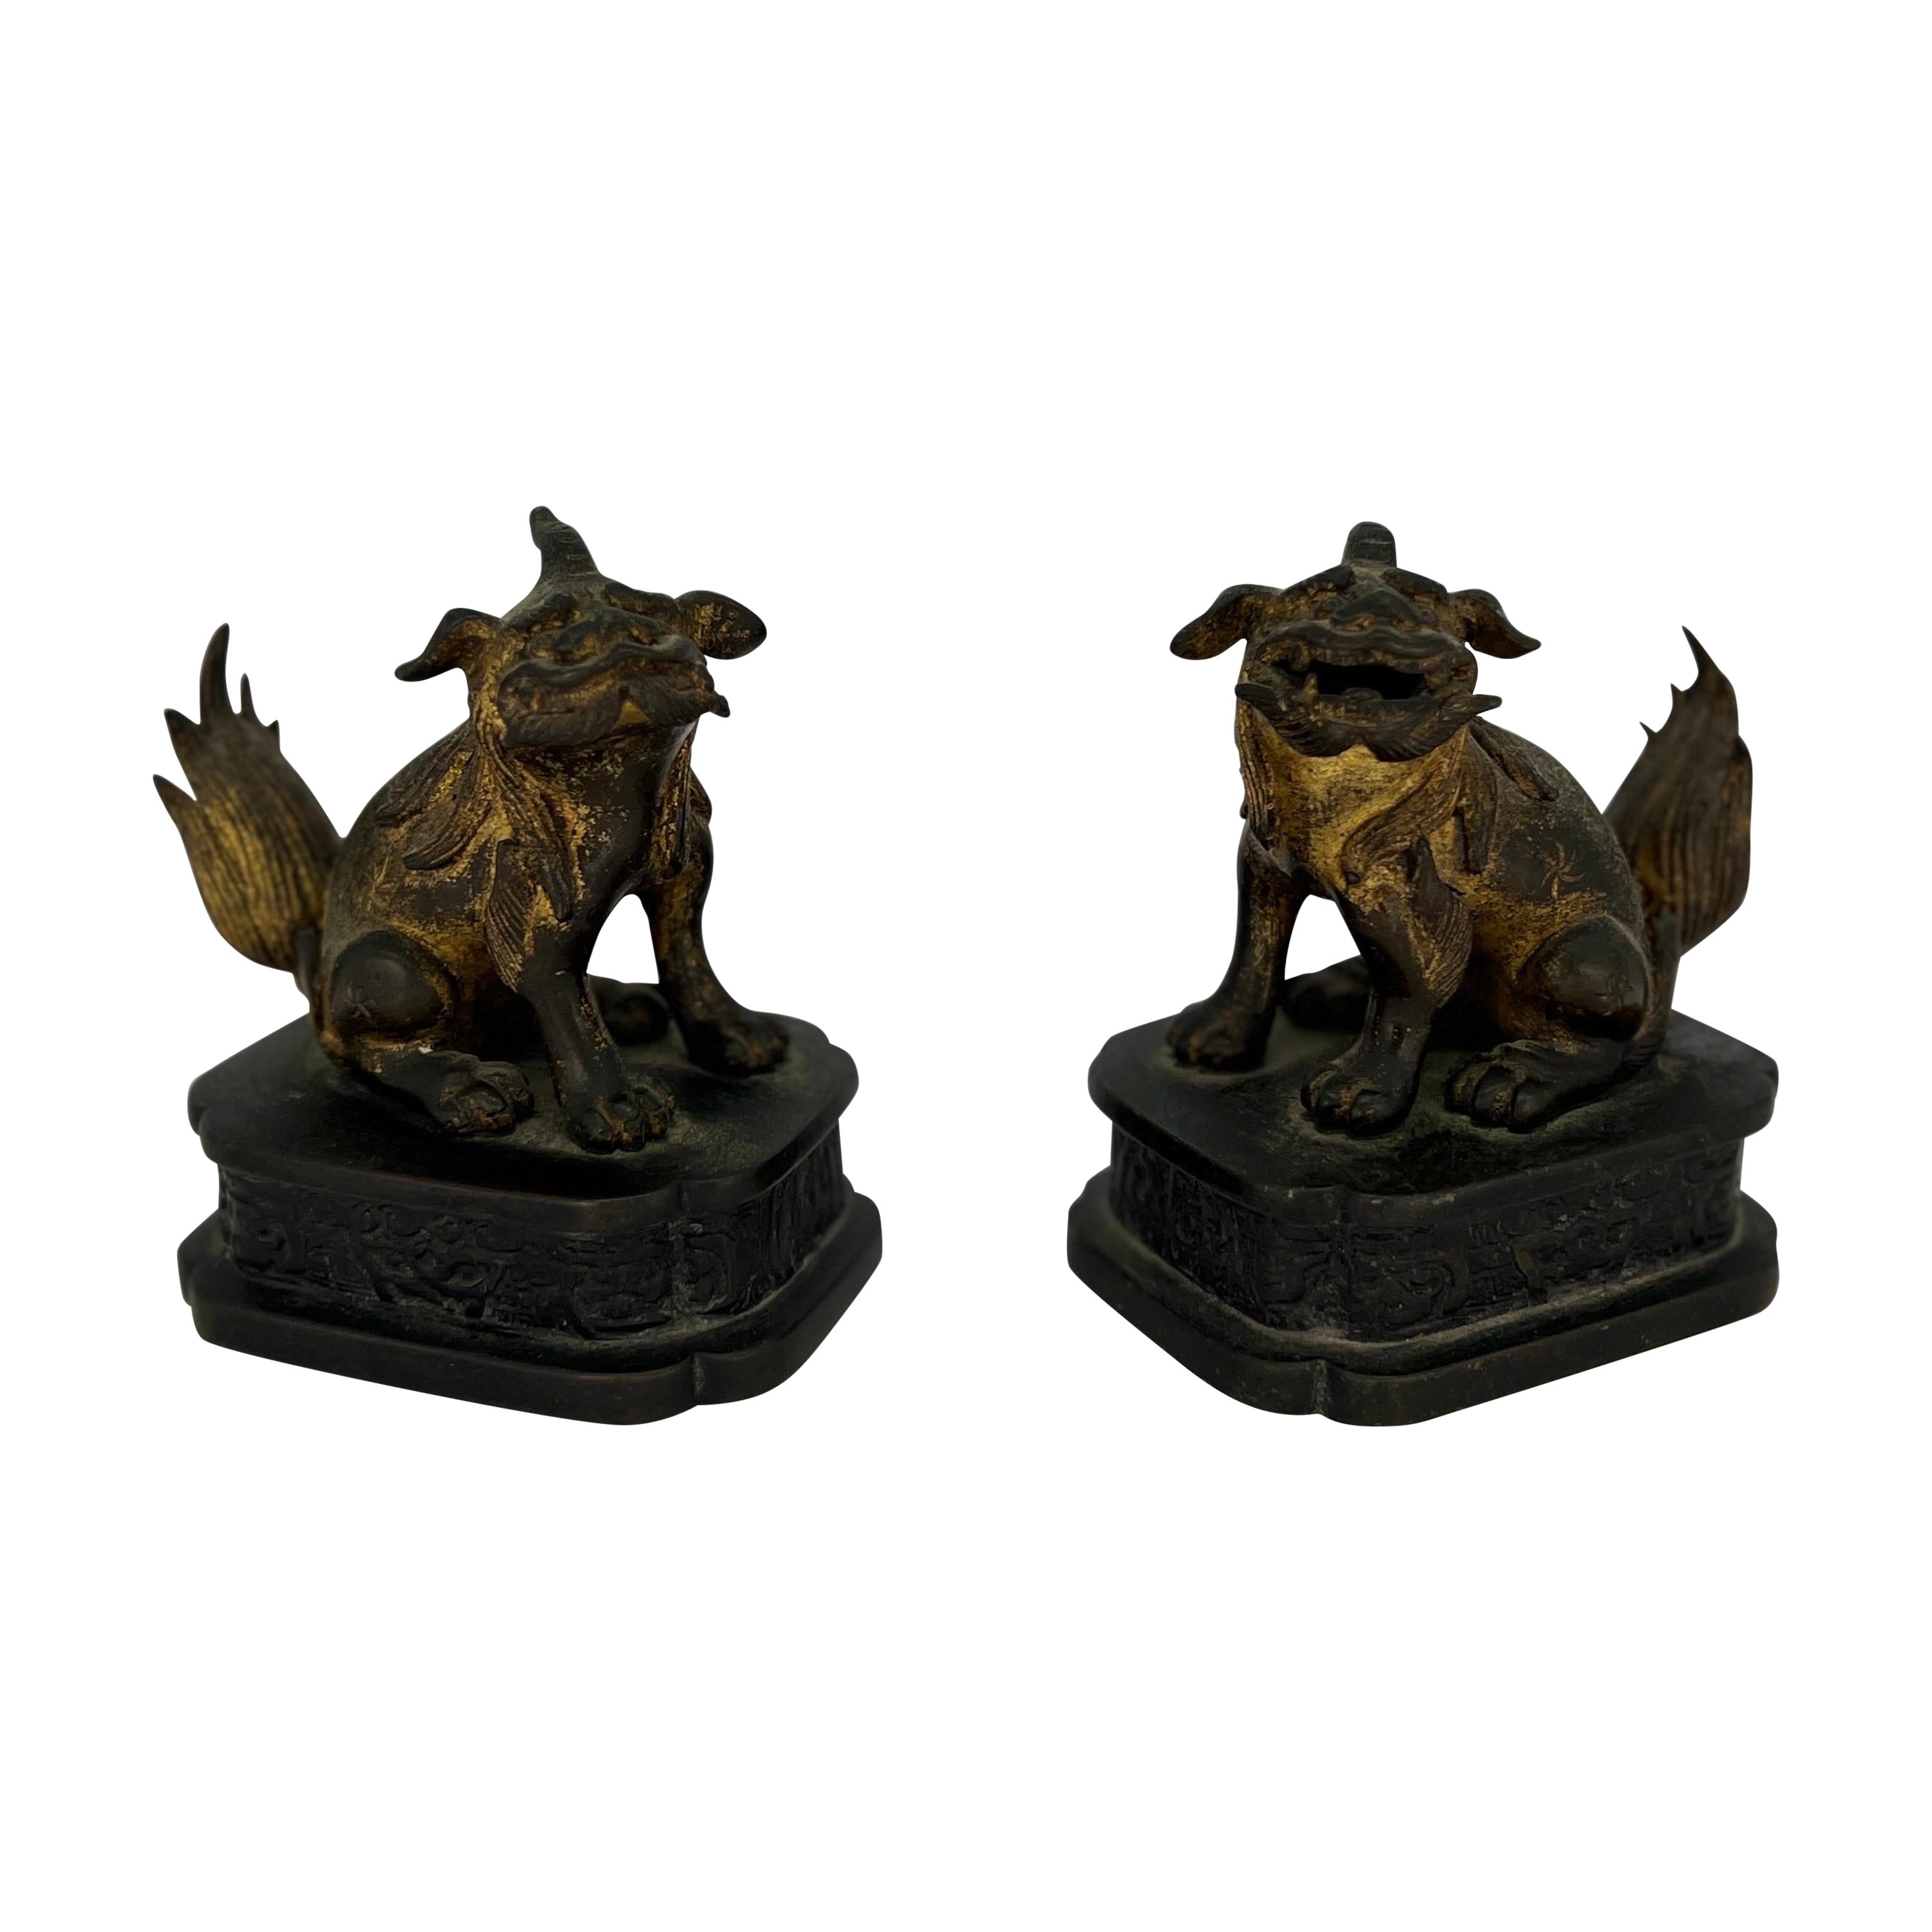 Pair, Ming Dynasty Gilt Bronze Diminutive Chinese Foo Dogs / Guardian Lions